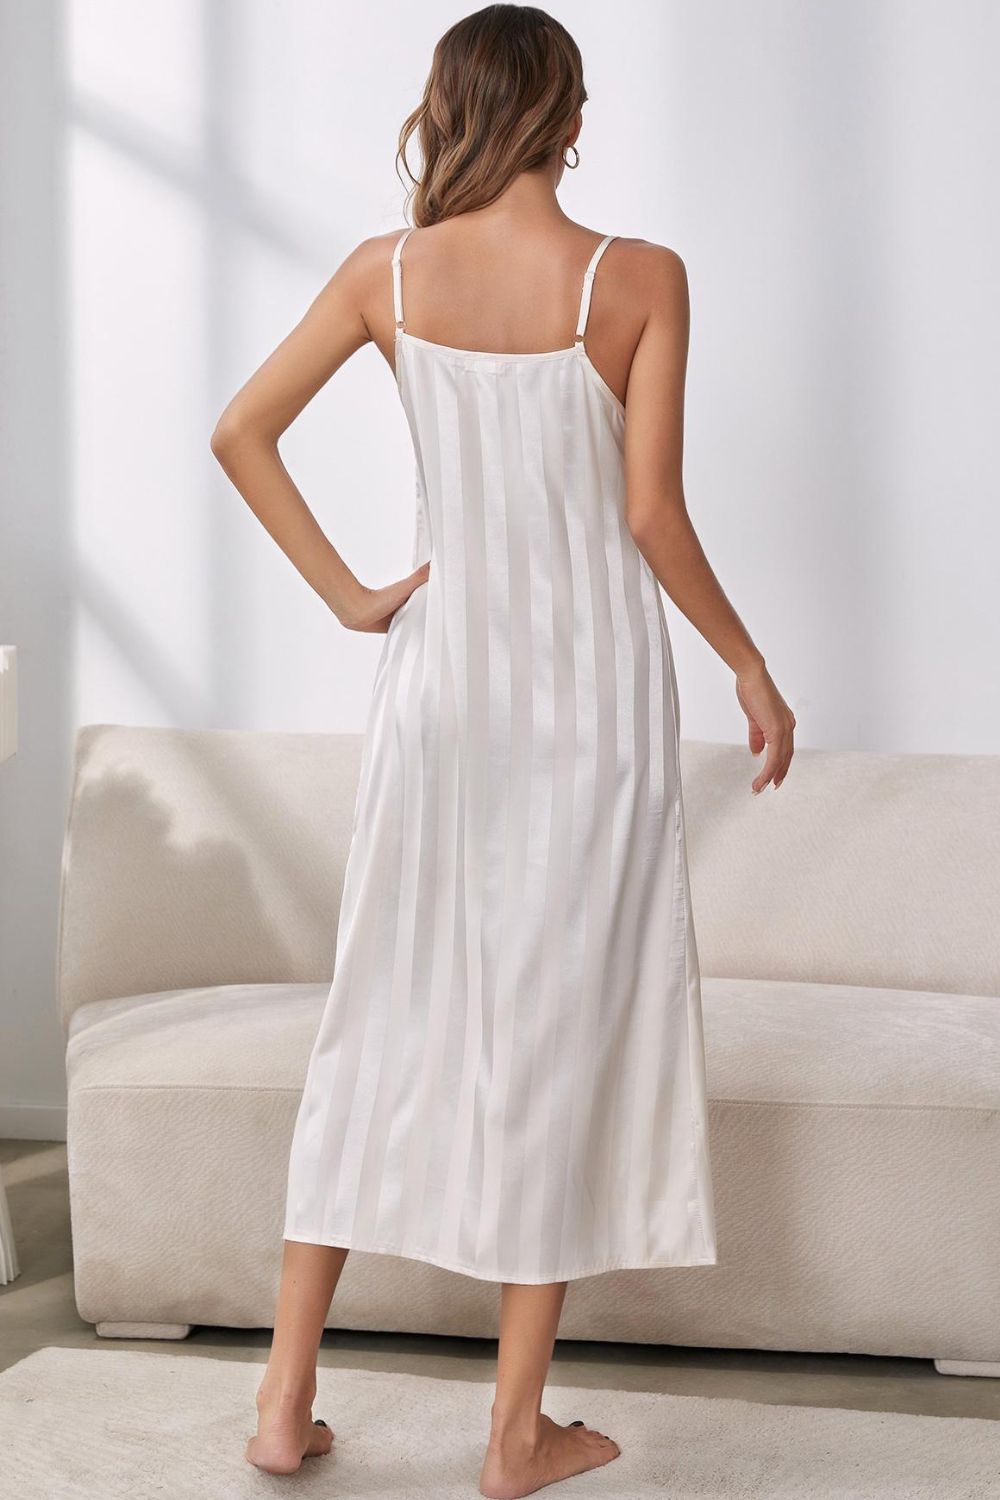 Back view of woman standing in front of sofa wearing beige striped nightgown